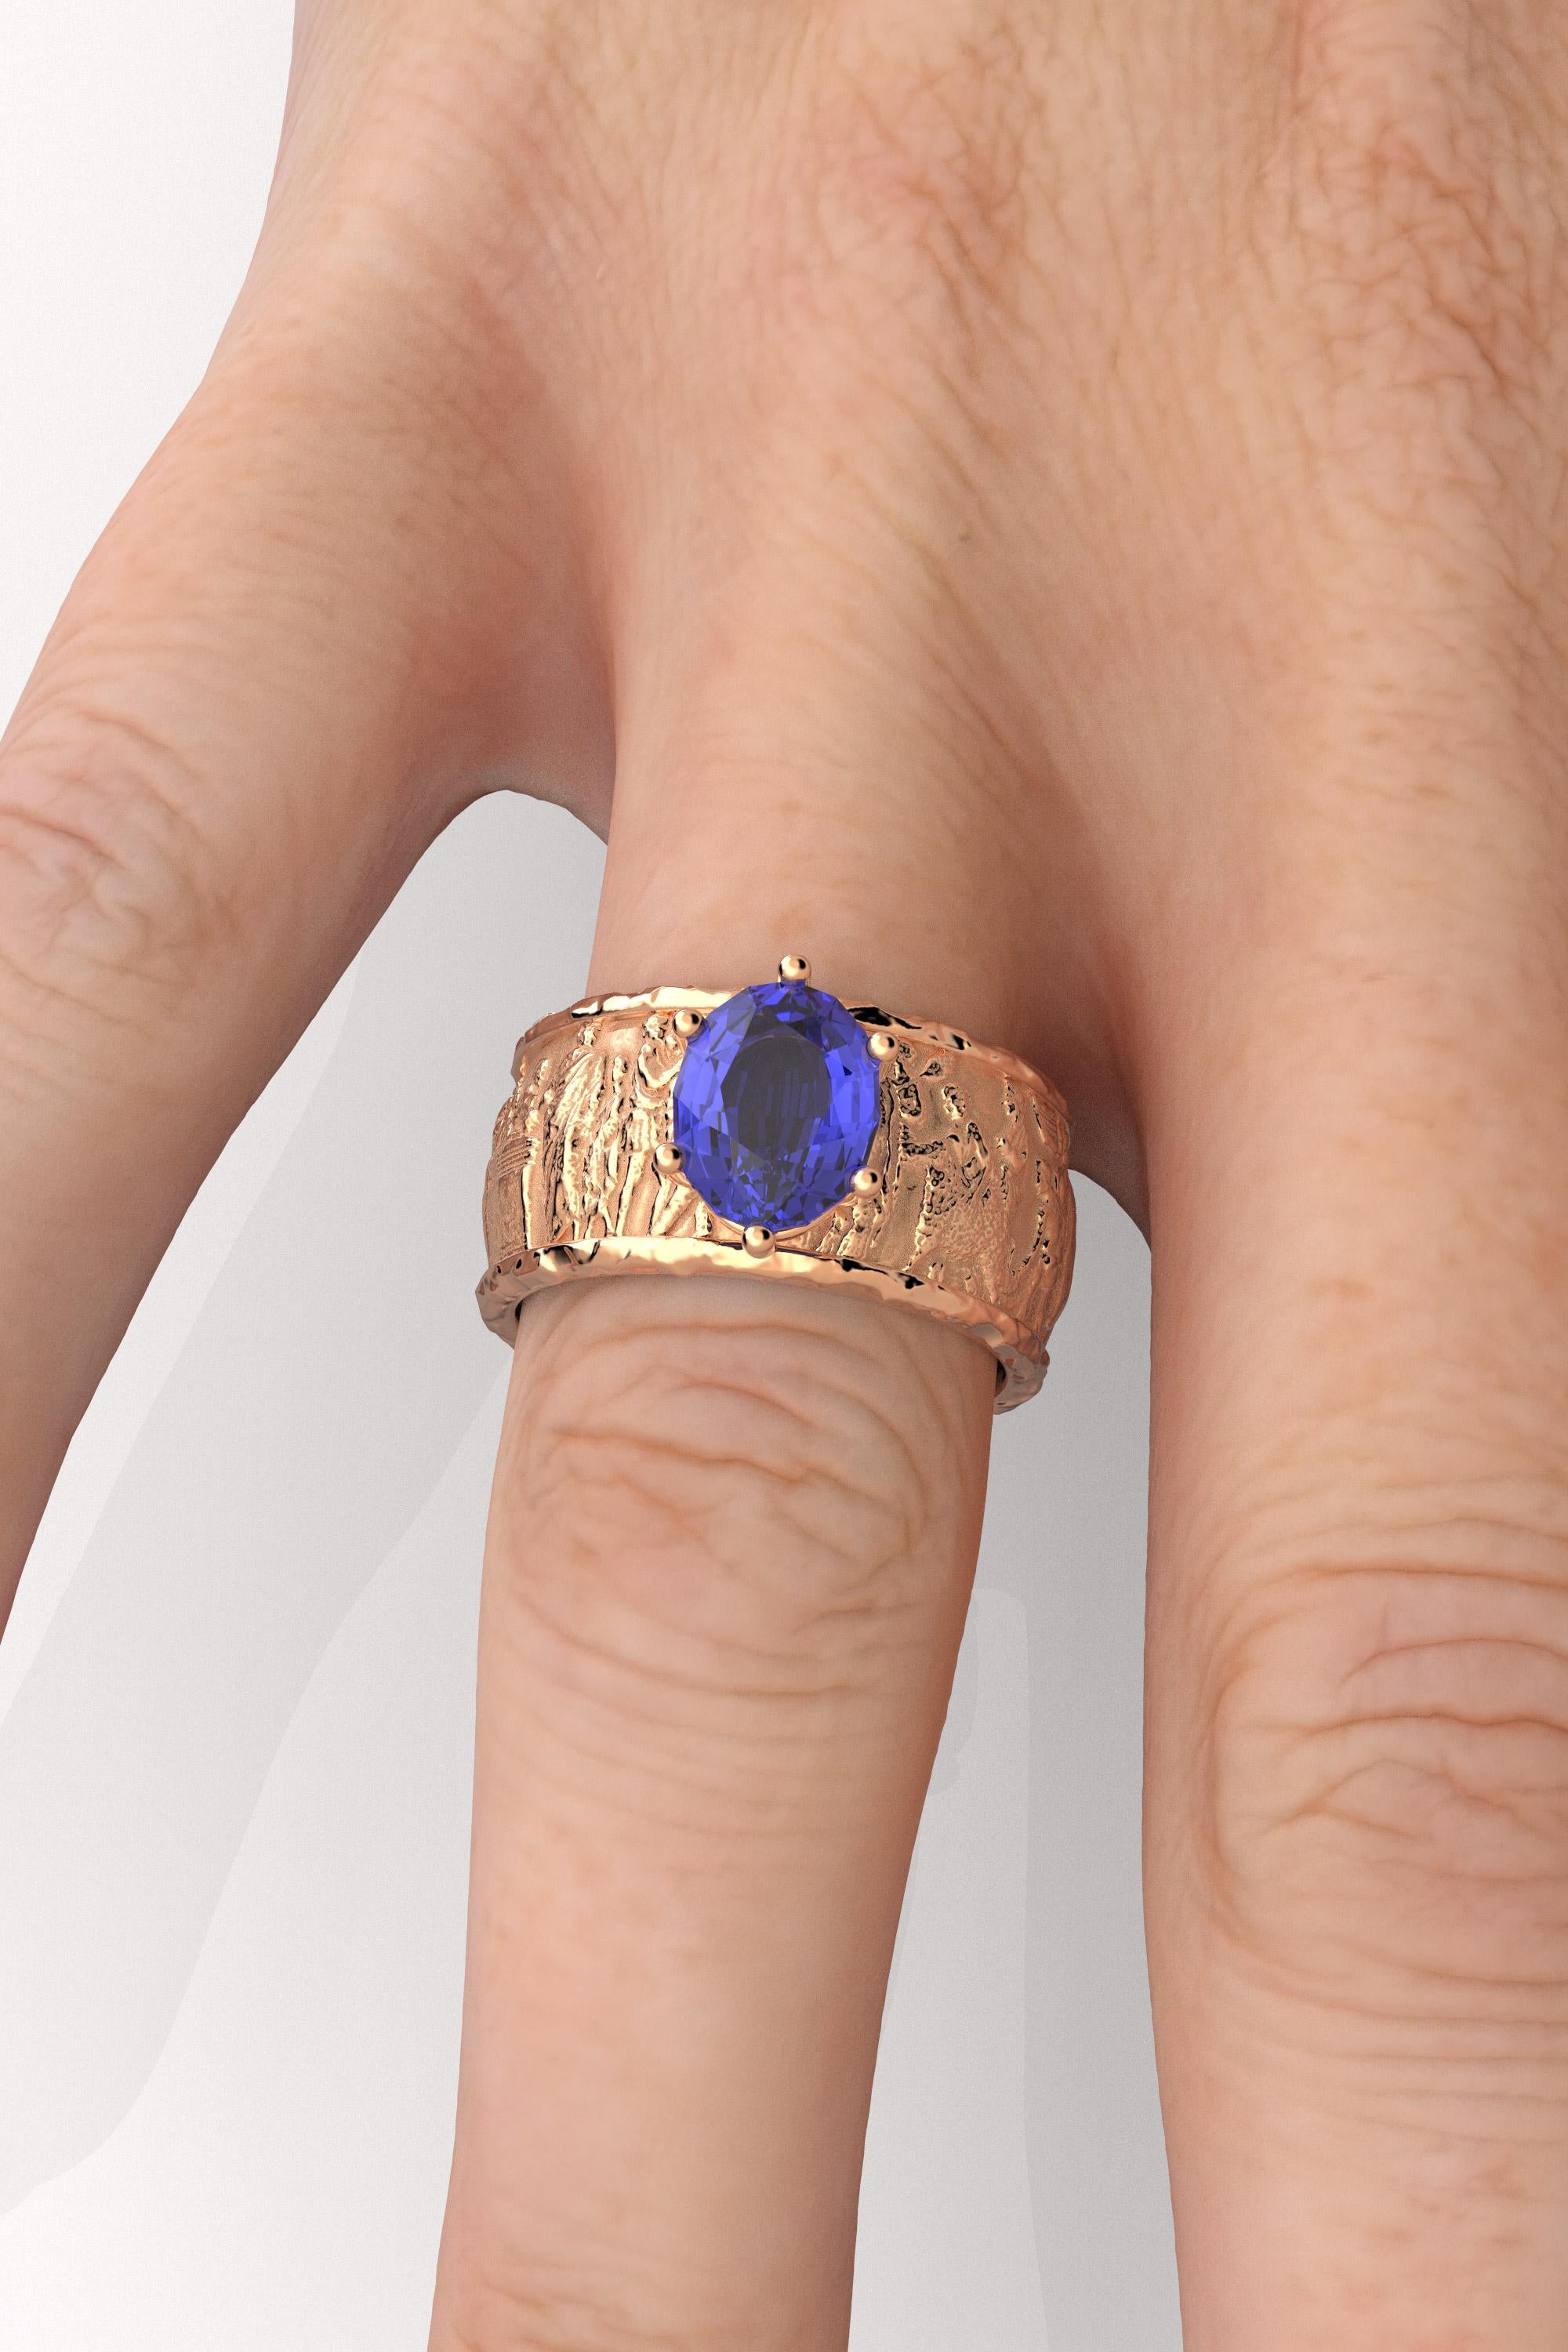 For Sale:  Tanzanite gold ring in 18k solid gold by Oltremare Gioielli made in Italy. 11